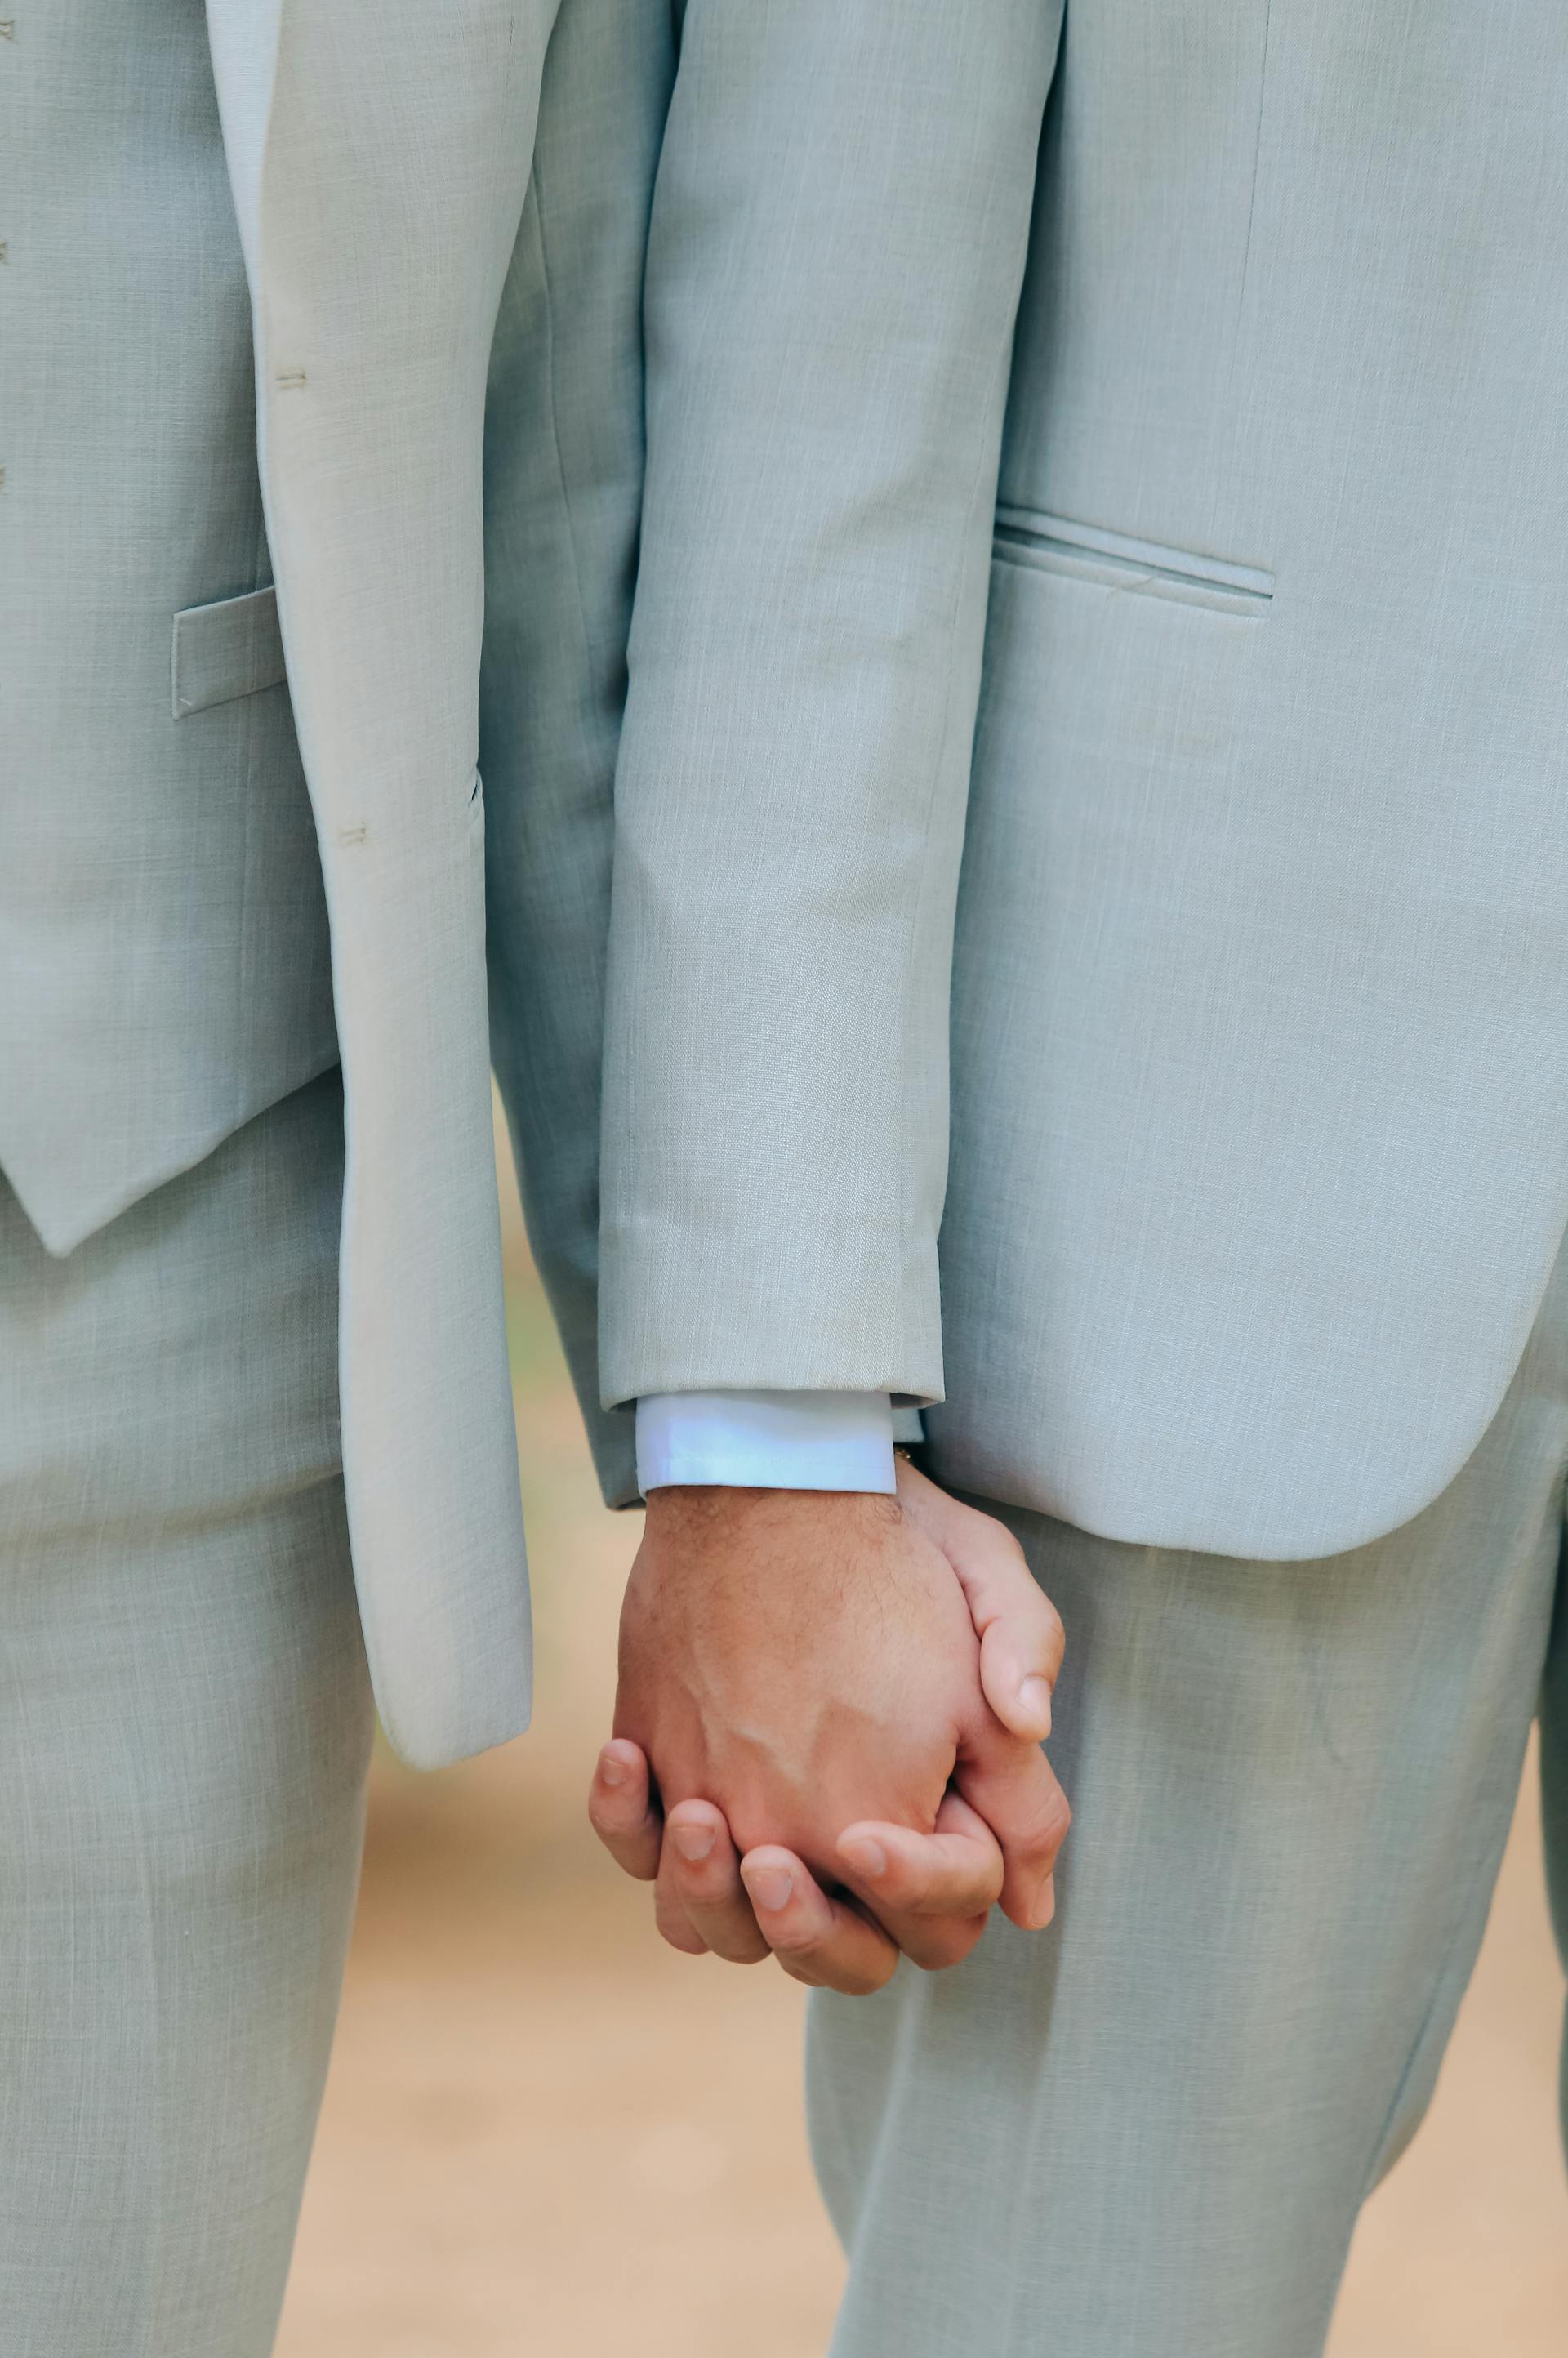 A gay couple holding hands | Source: Pexels